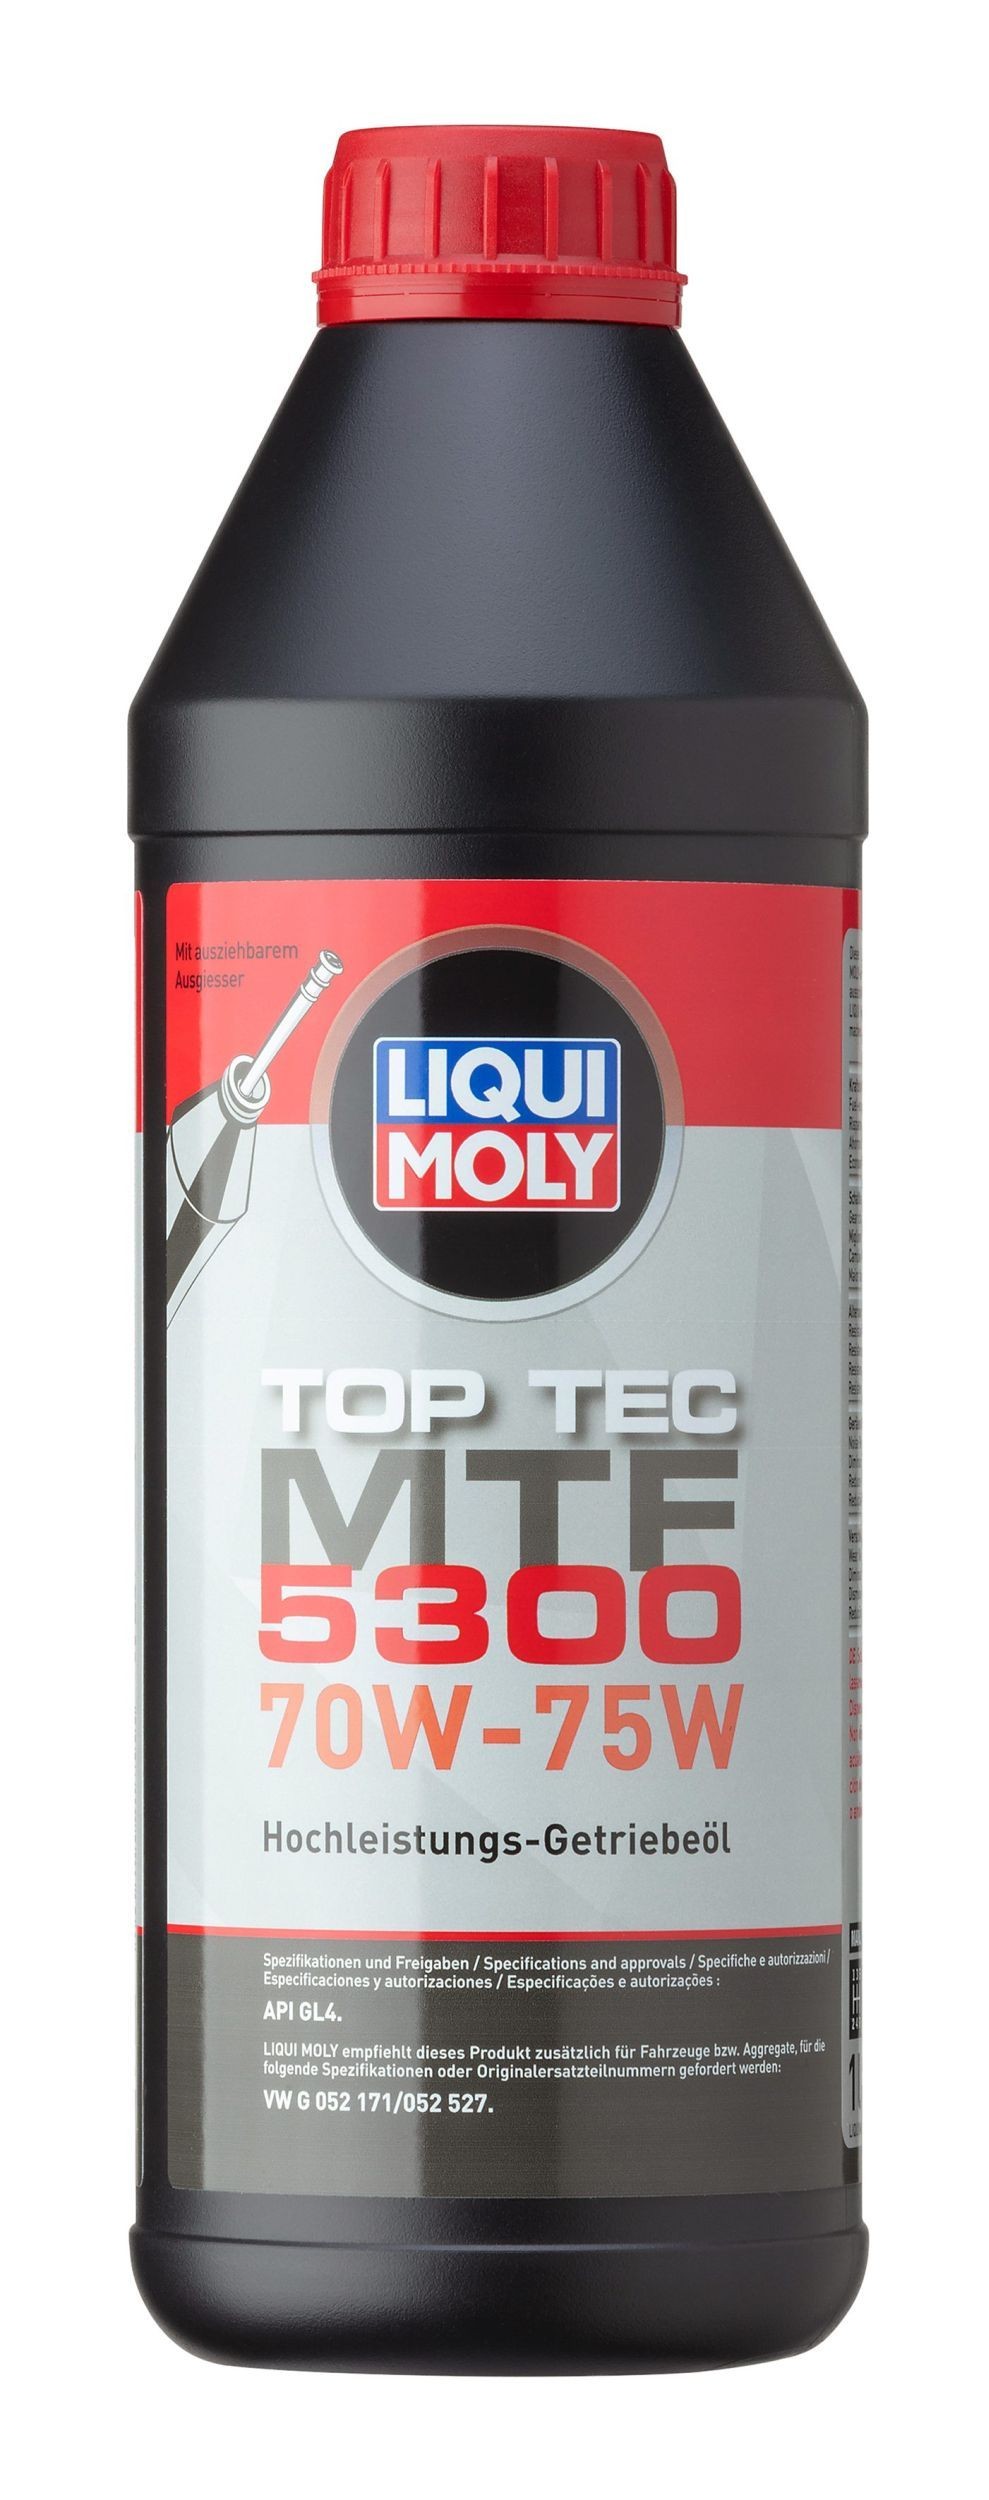 Great value for money - LIQUI MOLY Transmission fluid 21359